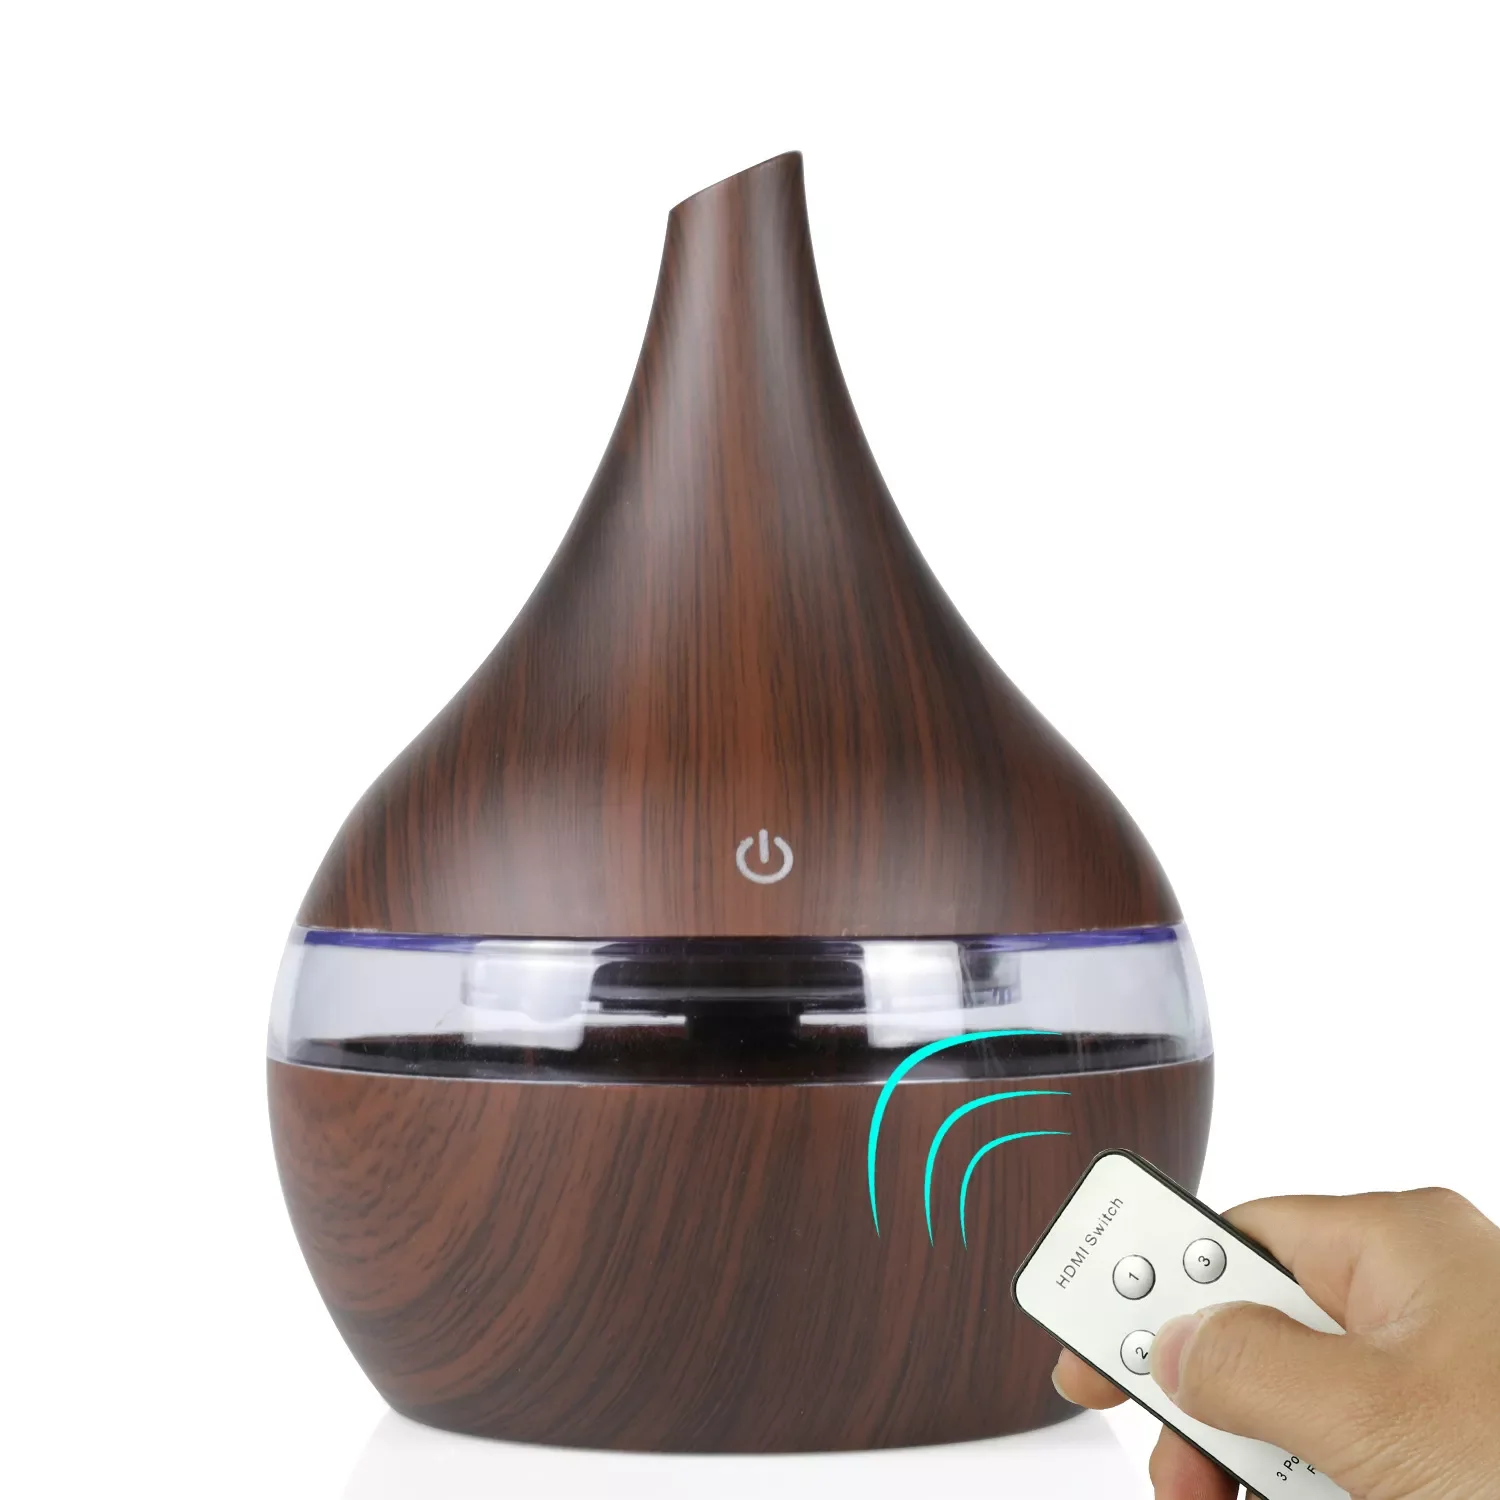 

Wood Grain Essential Oil Diffuser Ultrasonic 300ML Humidifier Household Aroma Diffuser Aromatherapy Mist Maker with LED